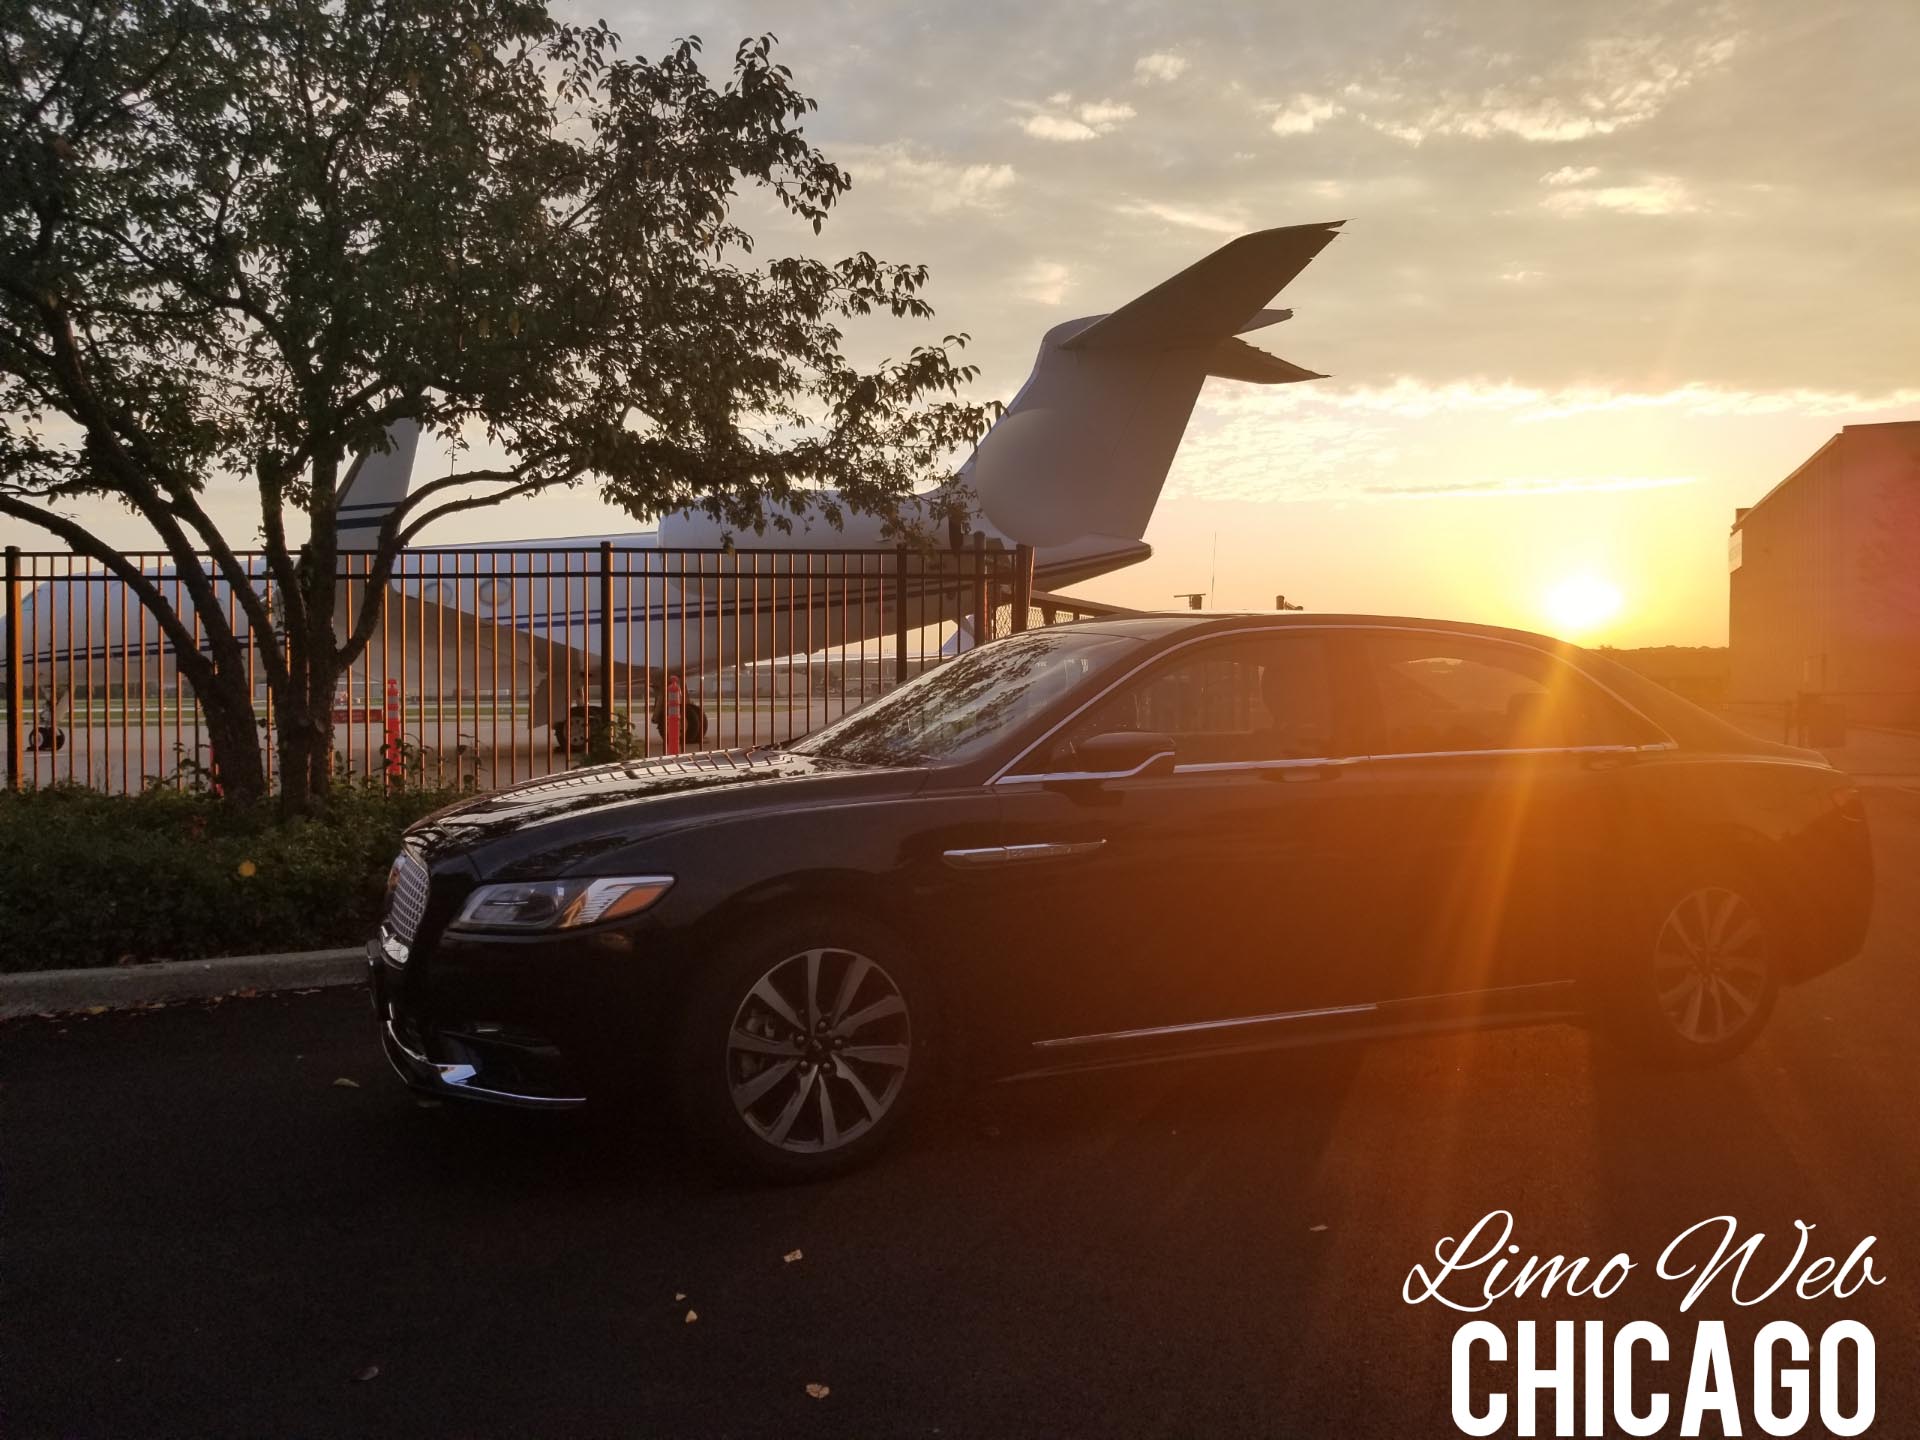 How Limo Web Chicago is dealing with Corona Virus